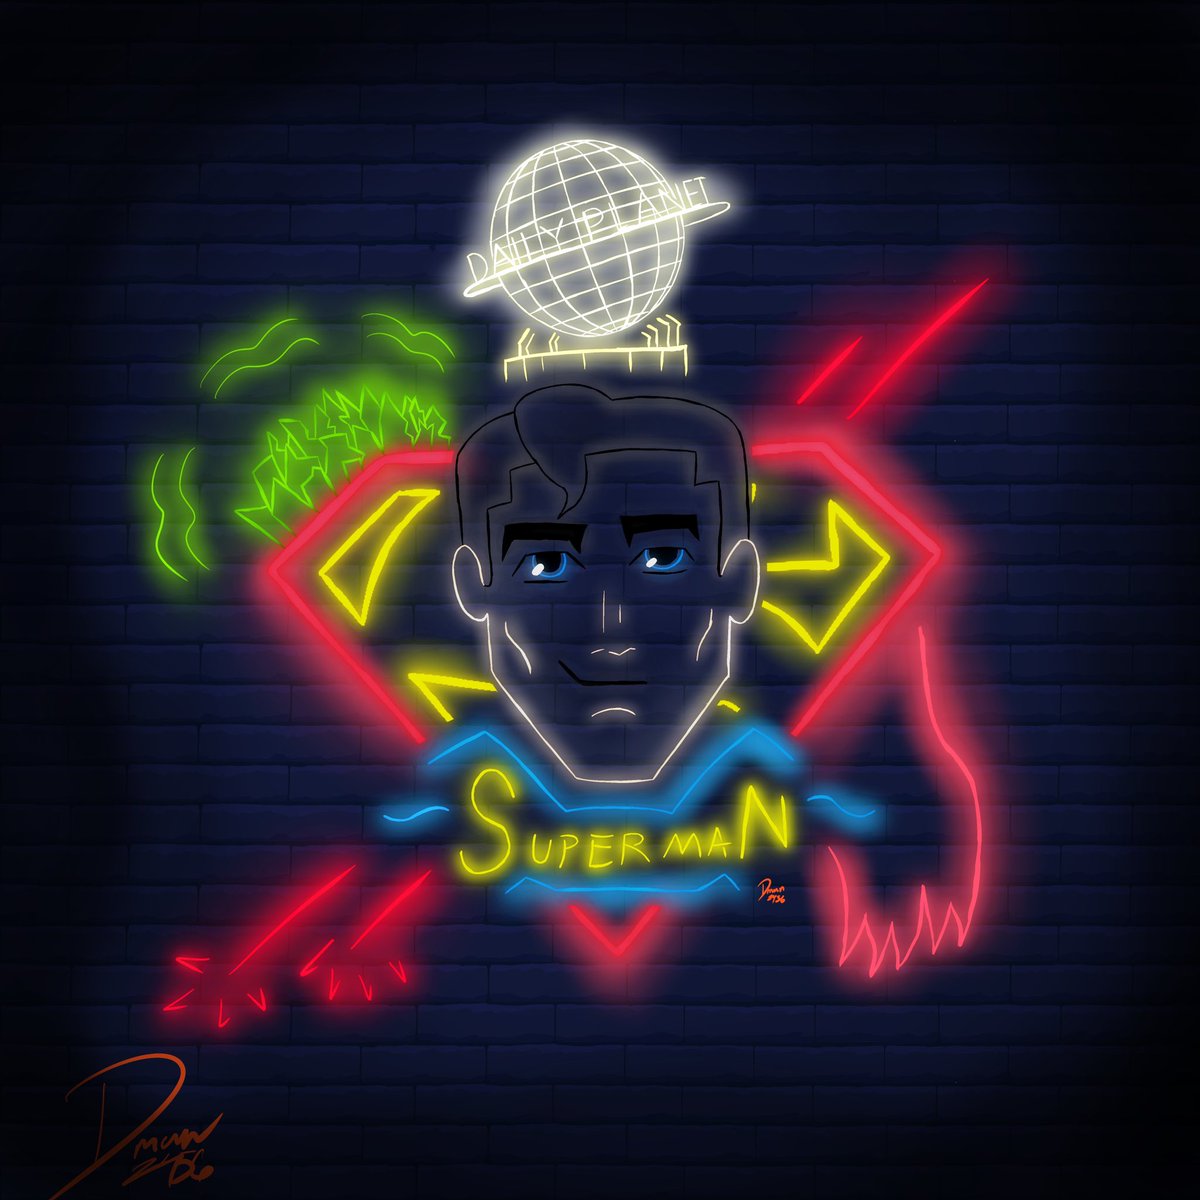 @multiversus Hope the man of steel likes this neon sign I made of him